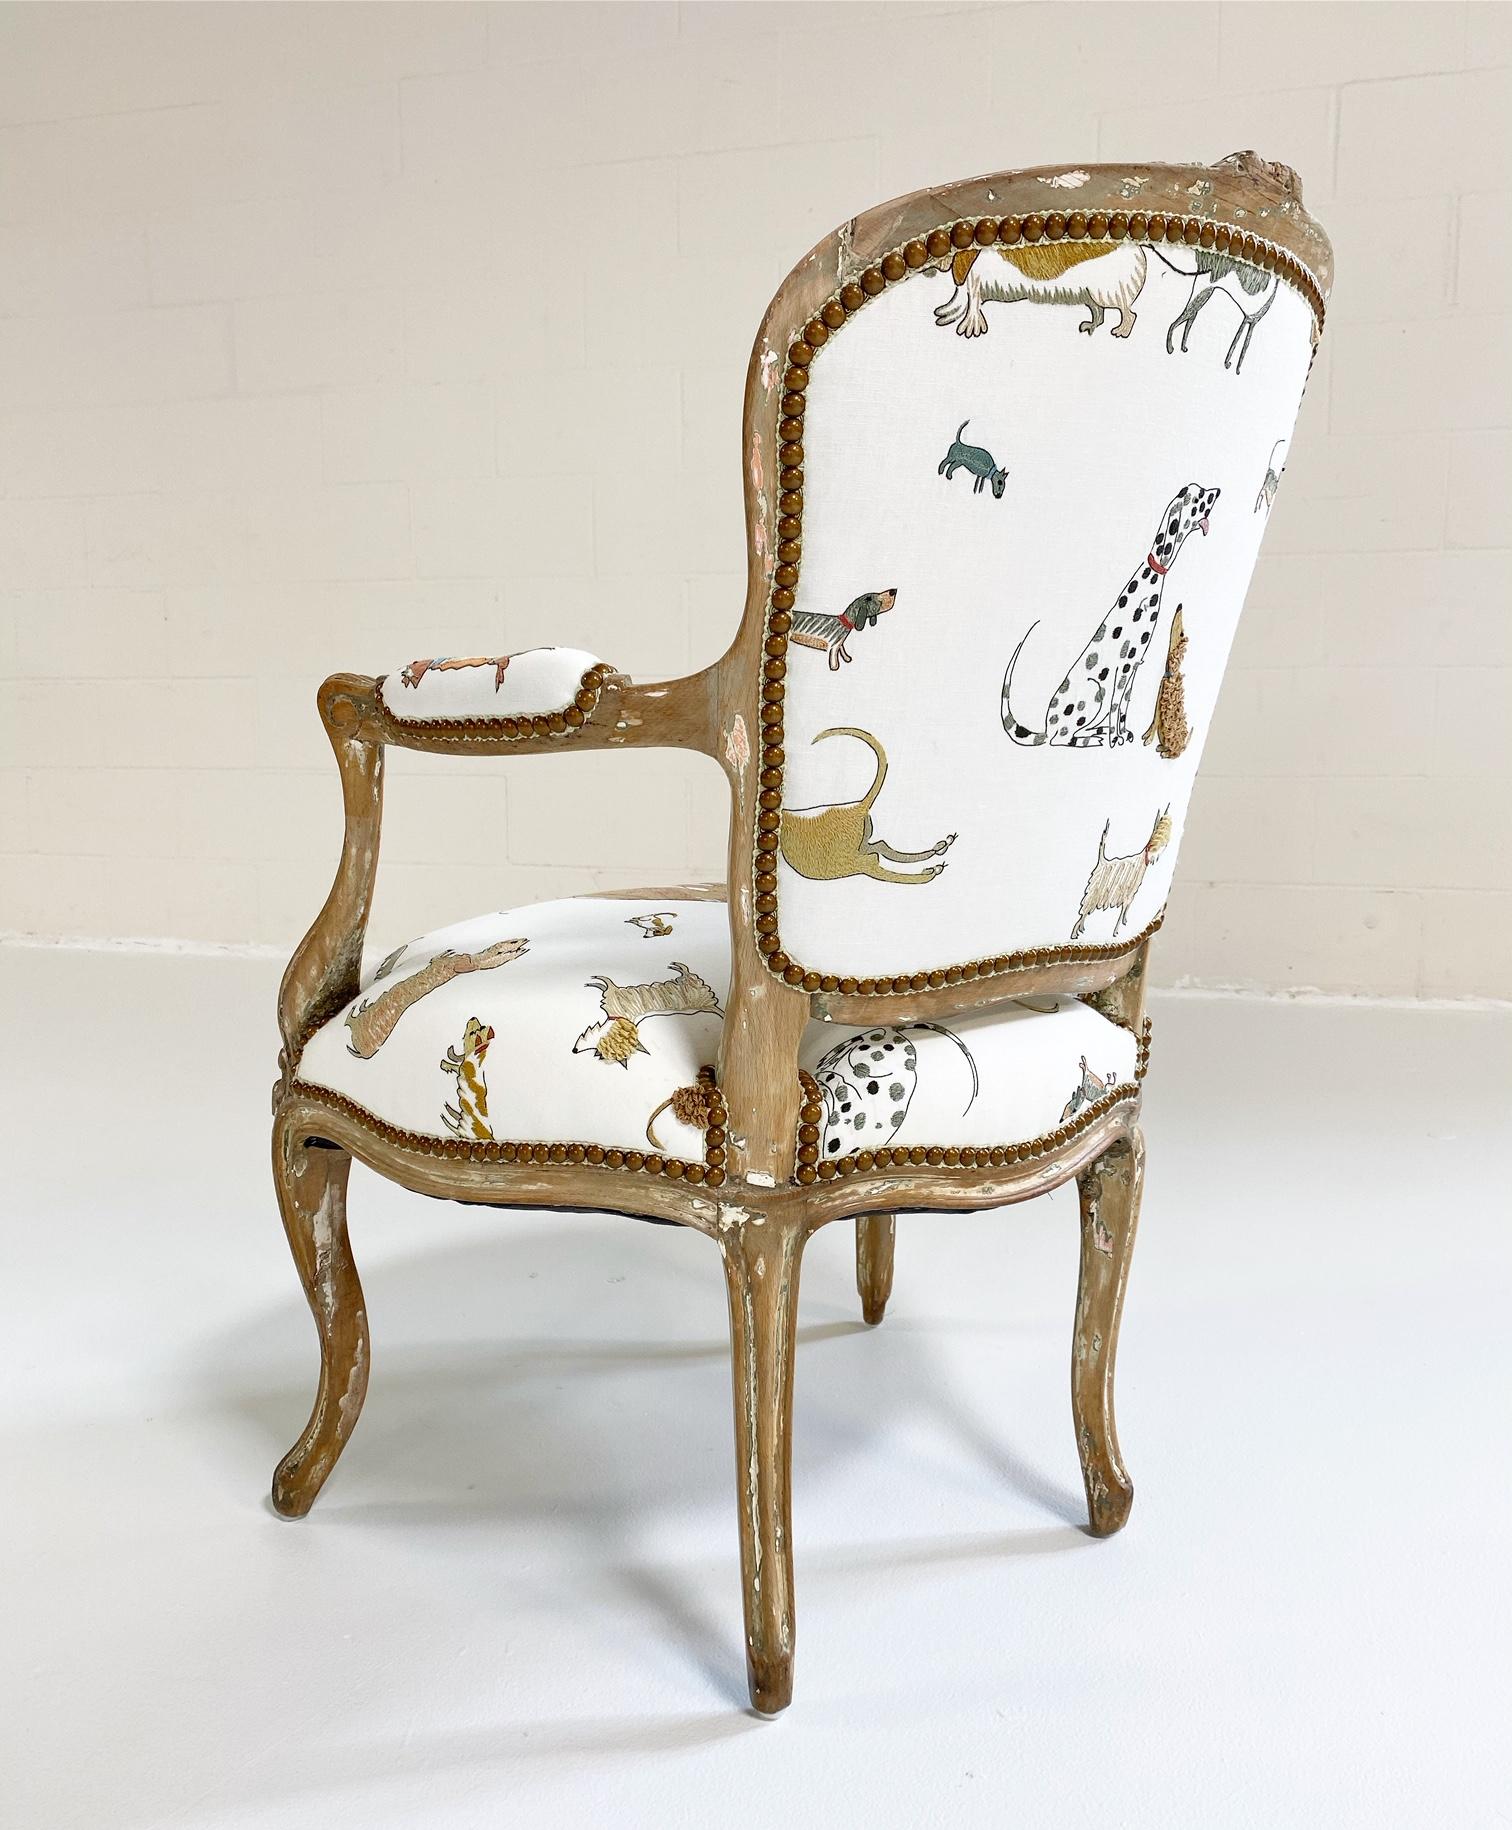 We love the frame of this antique chair. Stripped of earlier paint treatments, there are remnants of white, red, and green paints in the recesses. A perfectly-aged patina ripe for something modern, lively, and fun. We chose a favorite fabric,